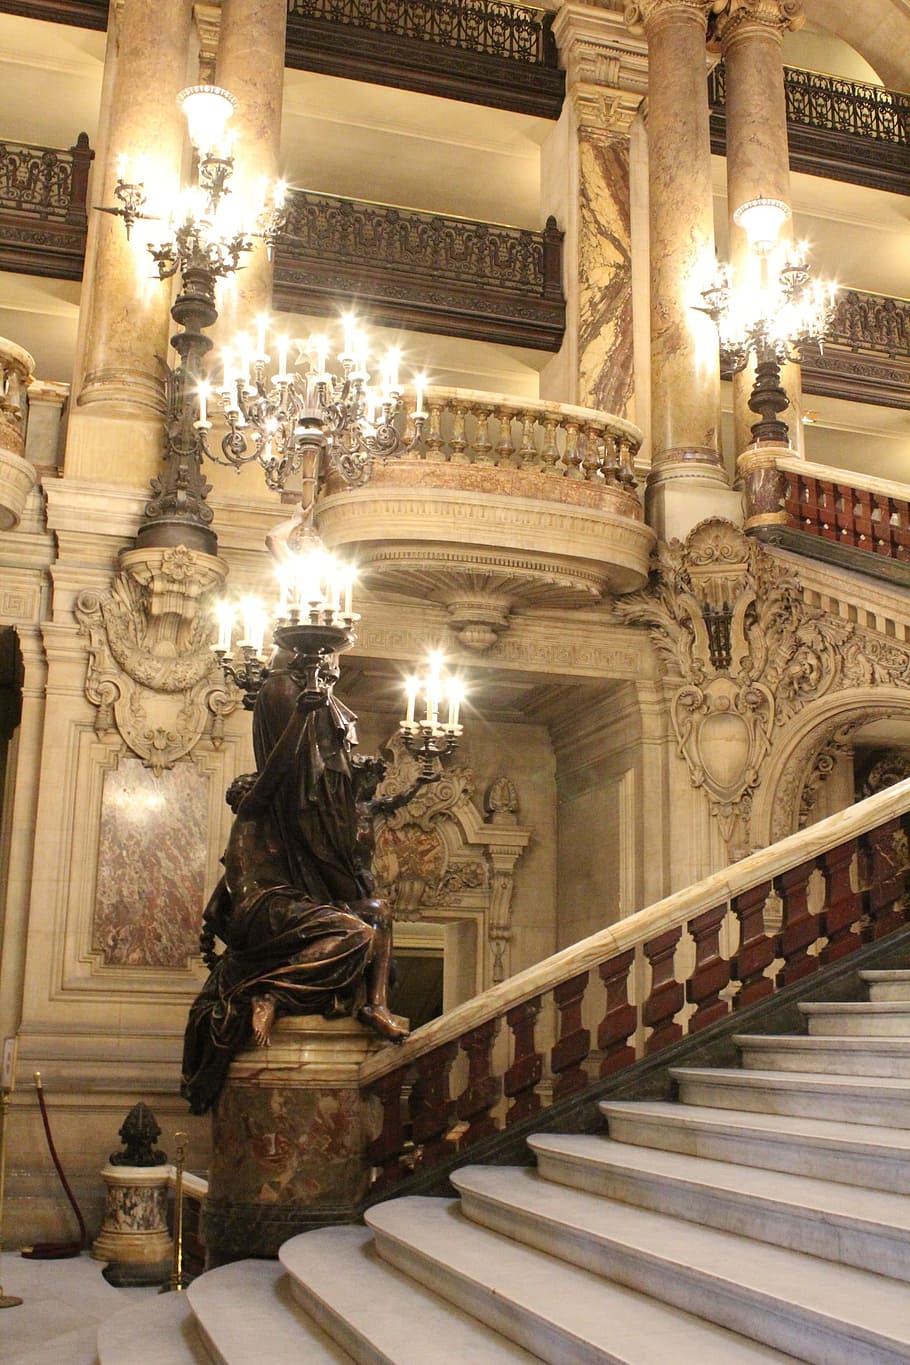 Opera, France, Wire, Theater, Show House, wire theater, statue, architecture, history, indoors